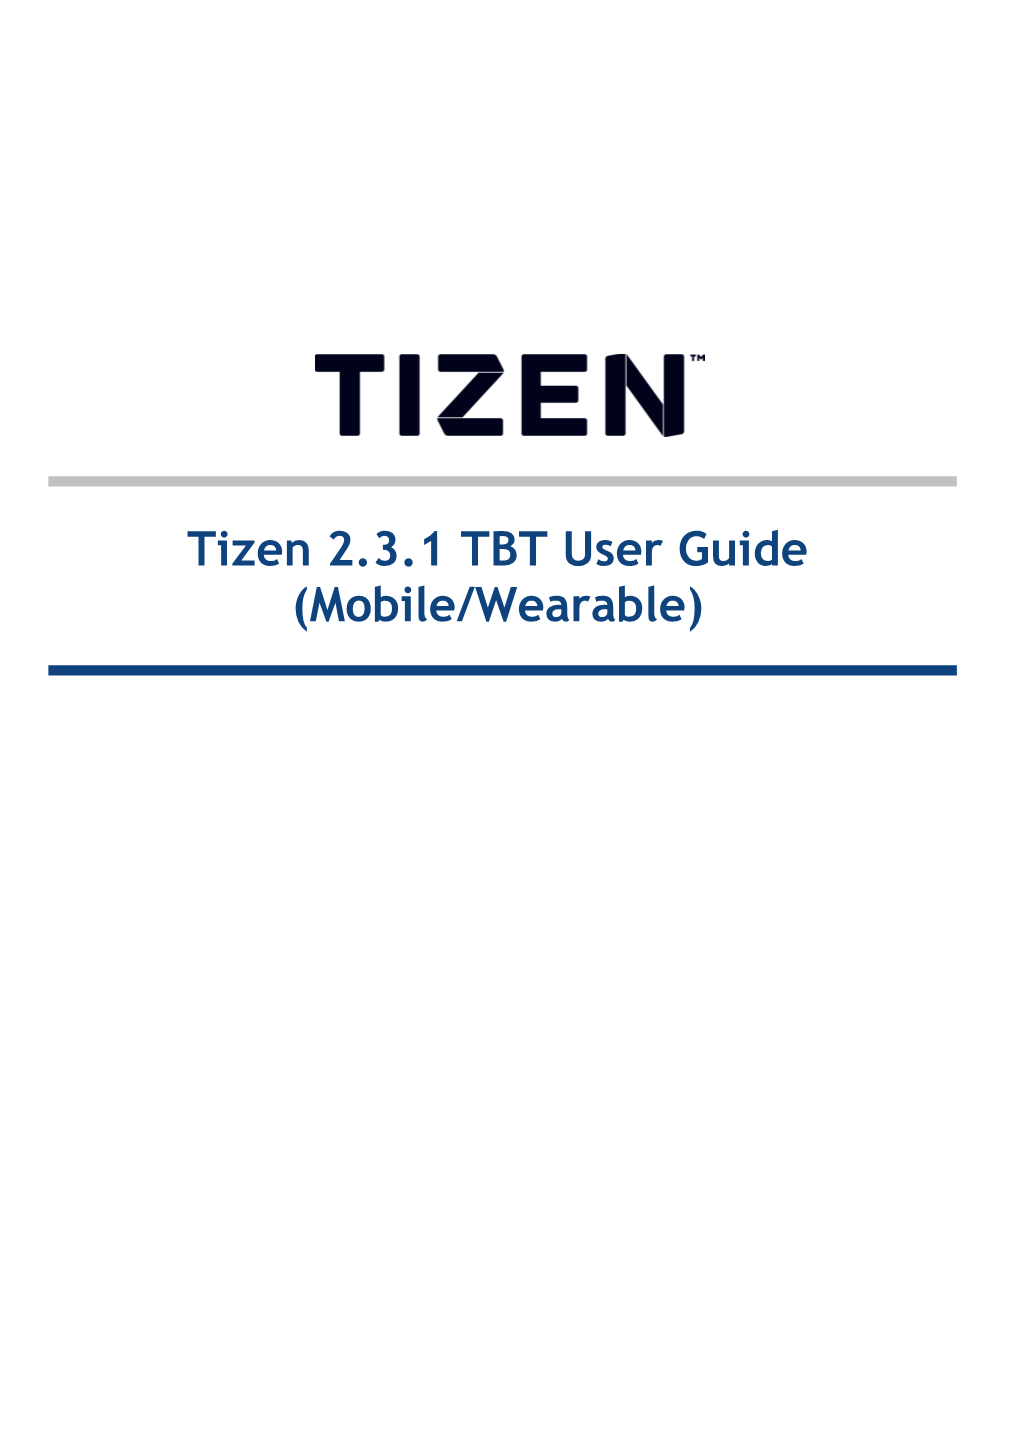 Tizen 2.3.1 TBT User Guide (Mobile/Wearable)